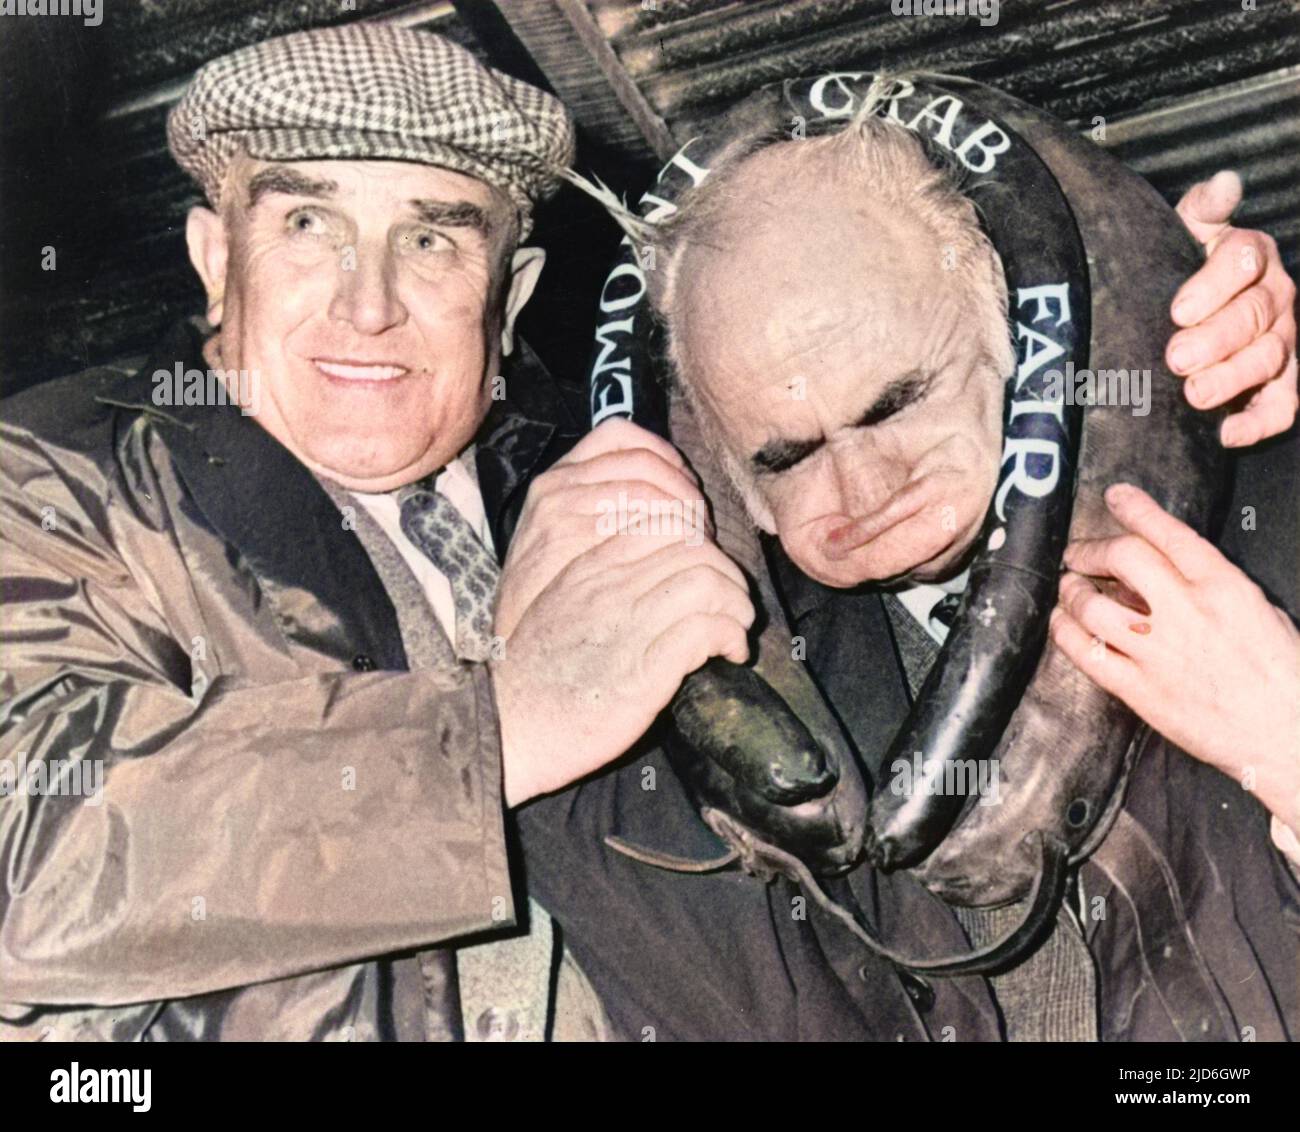 An old man gurner with his ugly face through a leather ring at the gurning contest at Egremont Crab Fair, Whitehaven, Cumbria, England. Colourised version of : 10185603       Date: 1980s Stock Photo